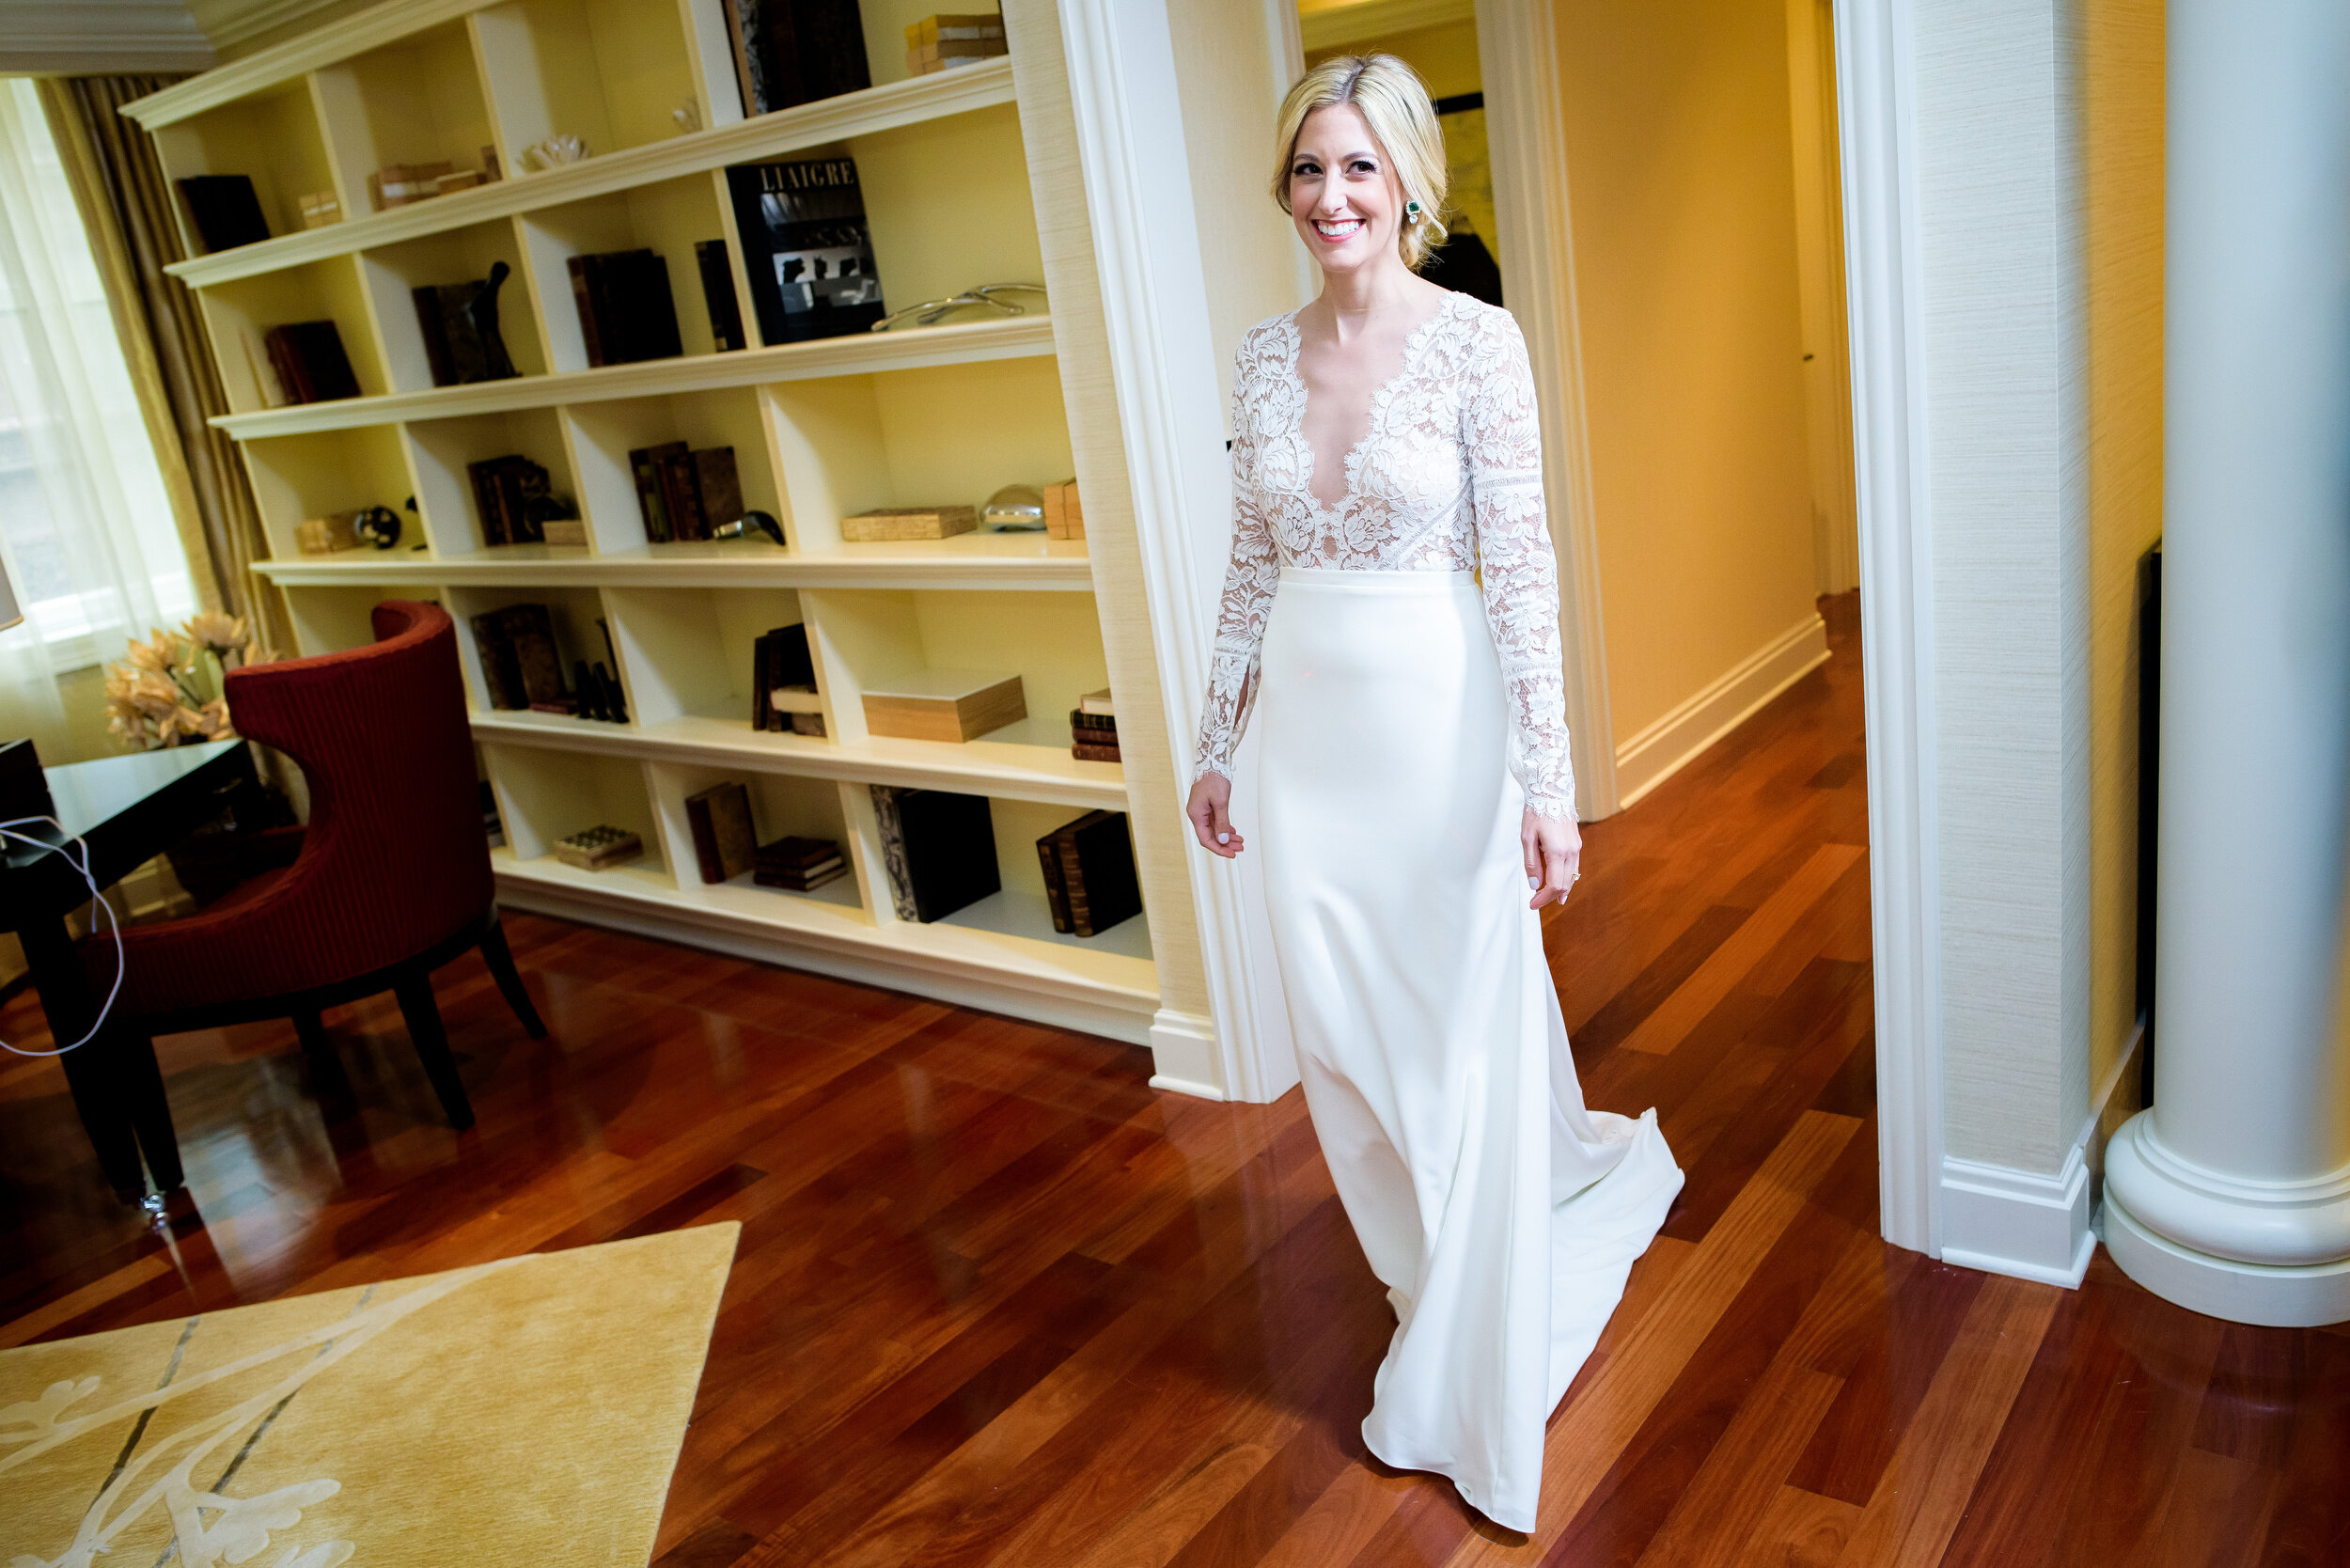 Bride ready for her wedding: Geraghty Chicago wedding photography captured by J. Brown Photography.